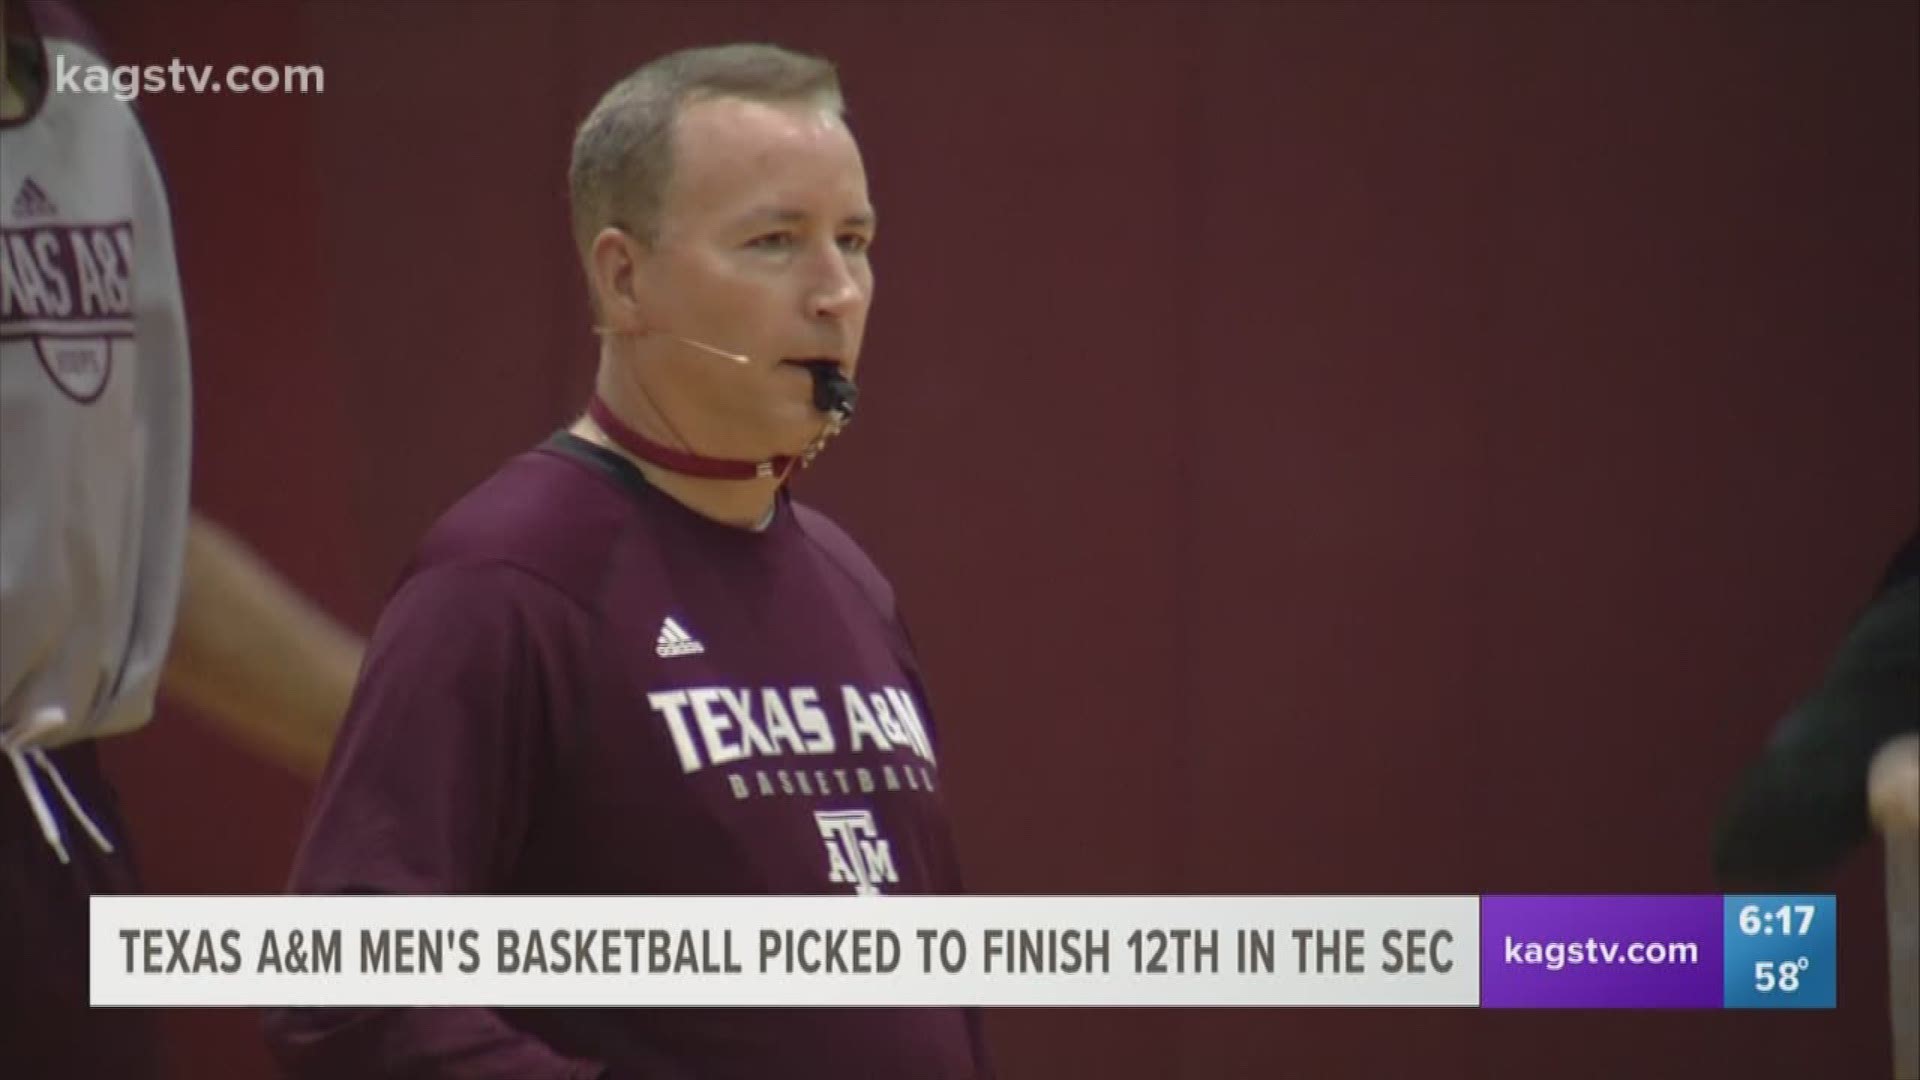 At SEC media day on Wednesday, the Texas A&M men's basketball team was picked to finish 12th. The Aggies will be guard heavy in 2018 and plan to use more tempo.